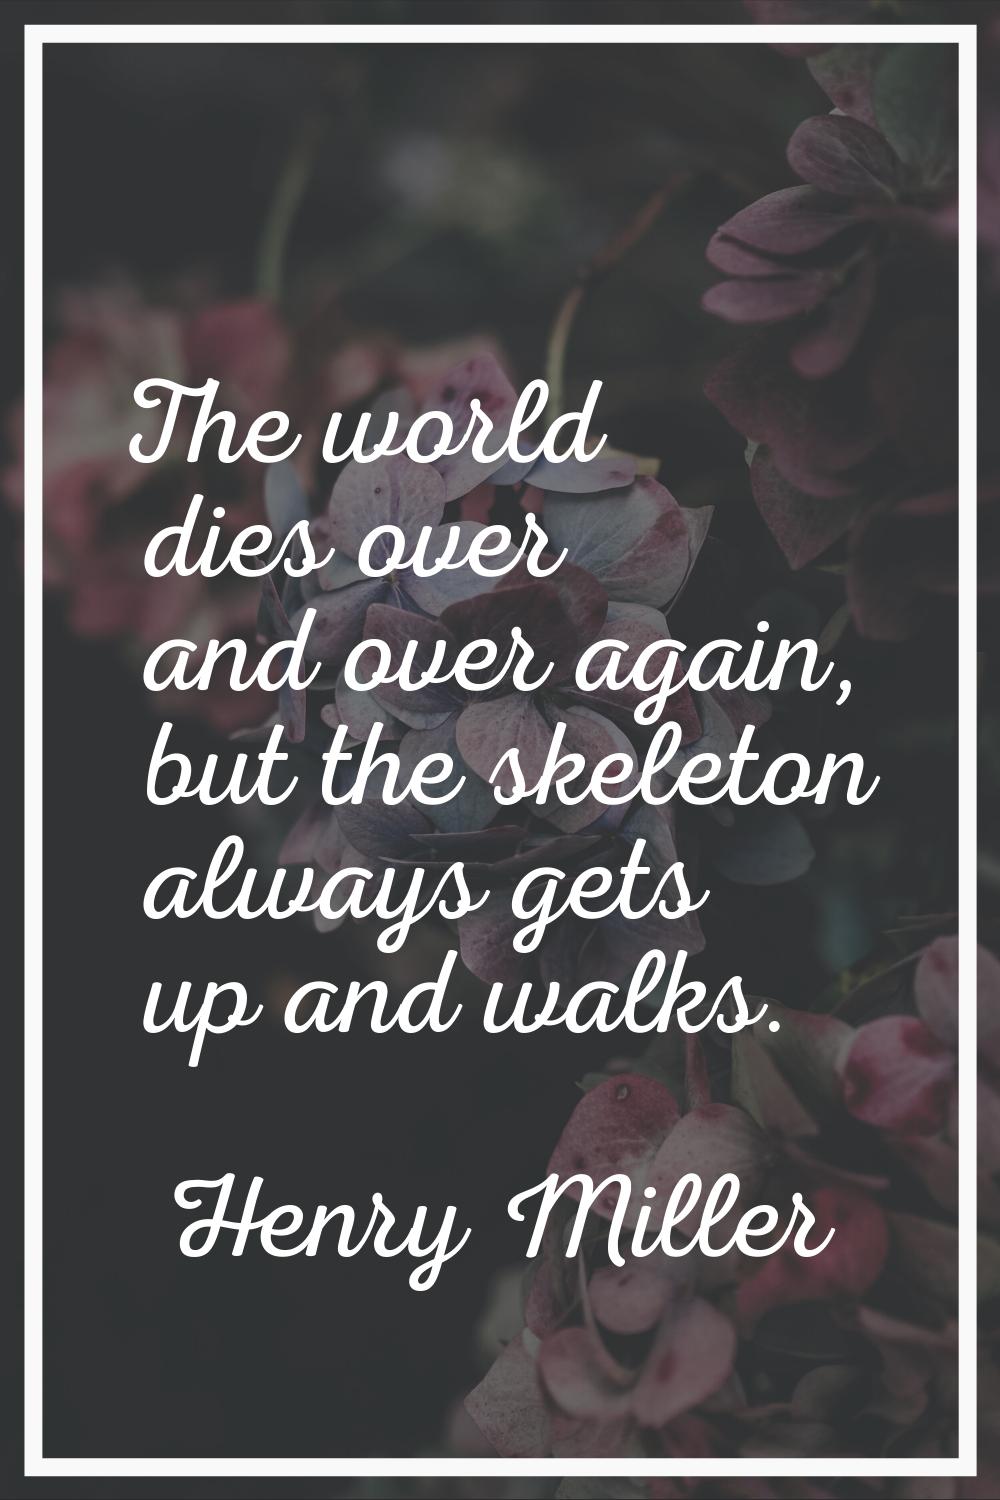 The world dies over and over again, but the skeleton always gets up and walks.